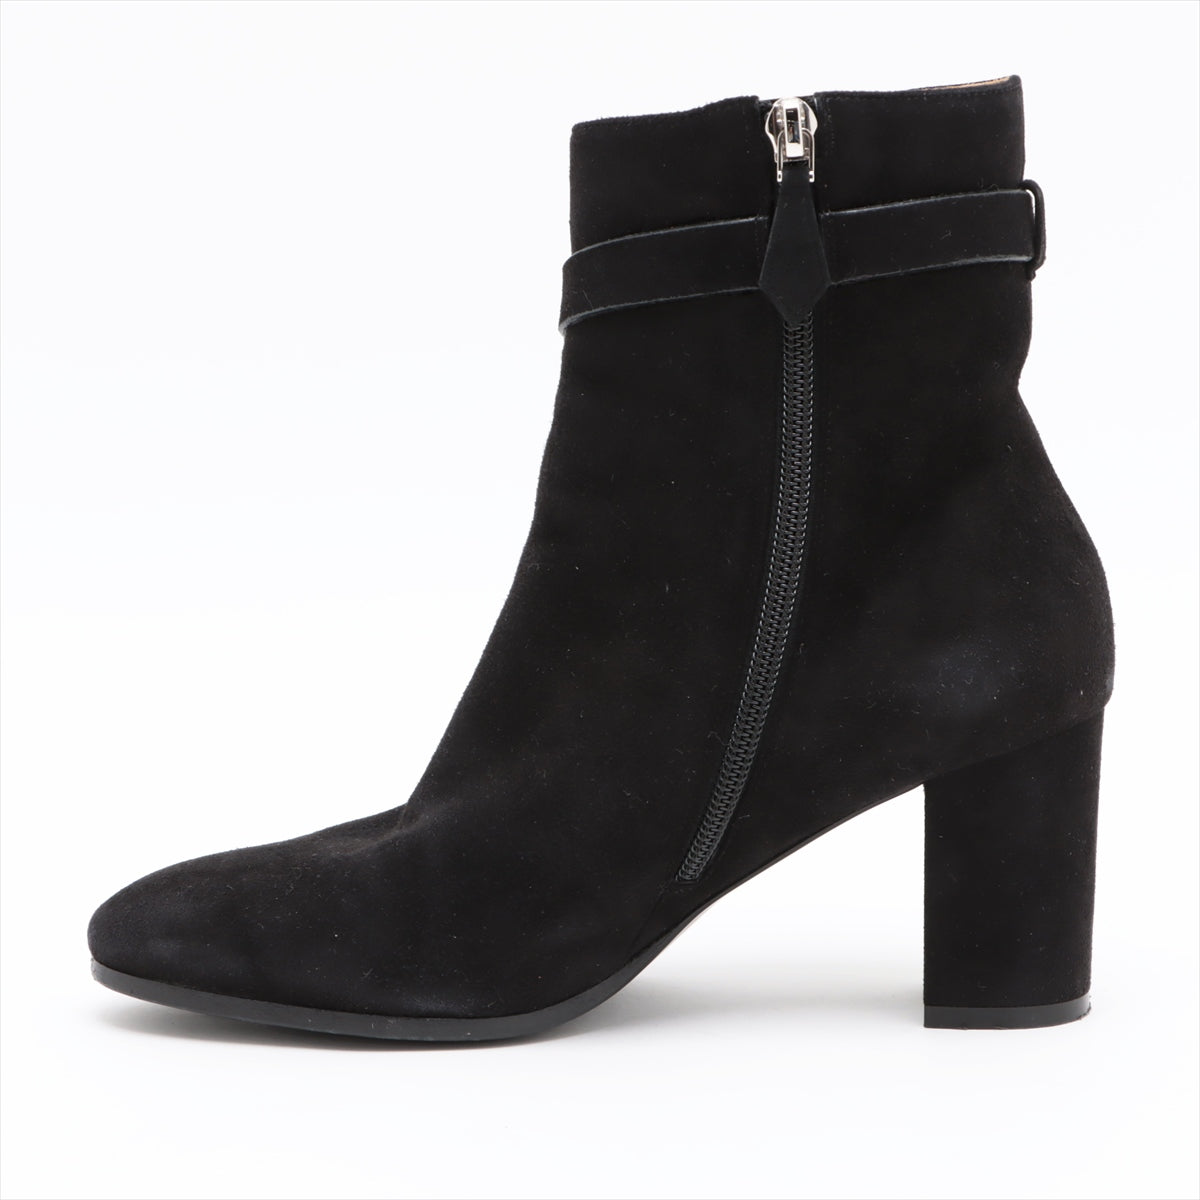 Hermès Saint Germain Suede leather Short Boots 35 Ladies' Black Kelly metal fittings box There is a bag